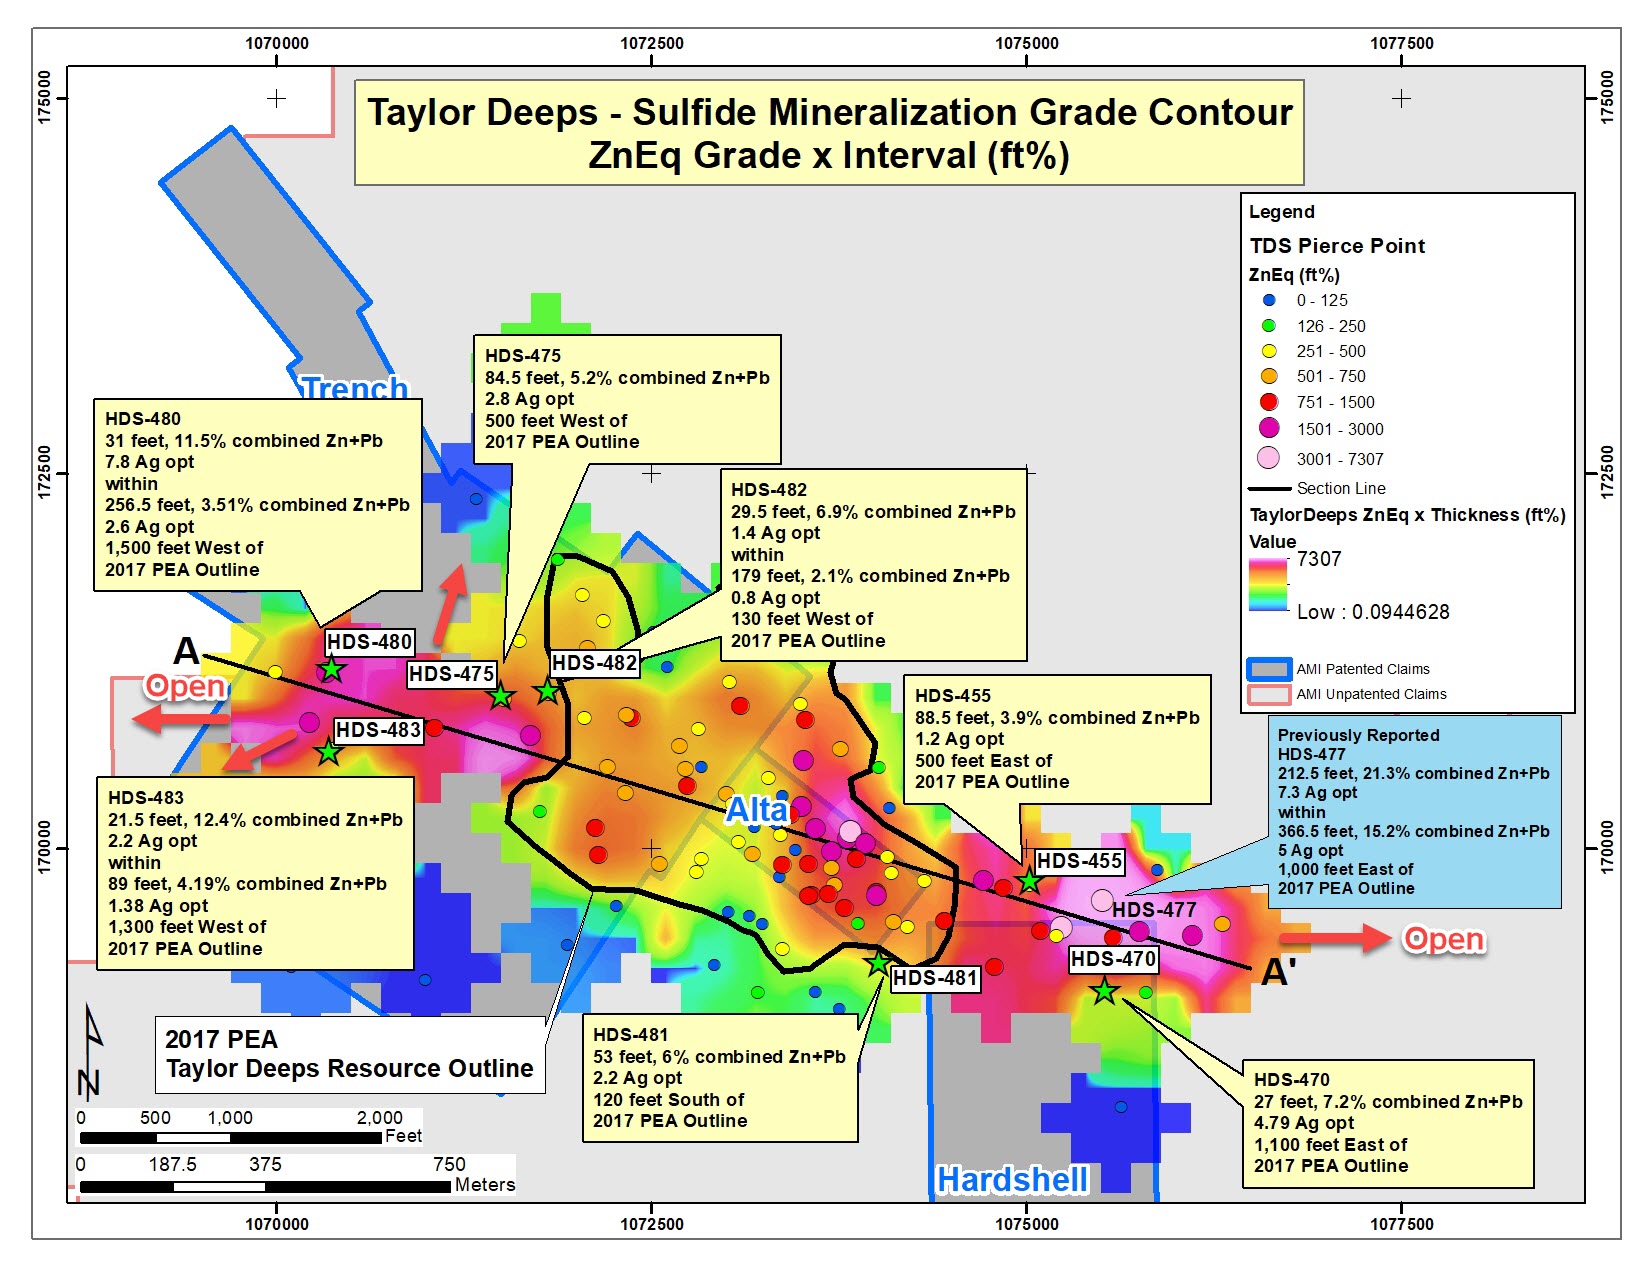 Figure 2. Plan View of Taylor Deeps with ZnEq Grade Contour